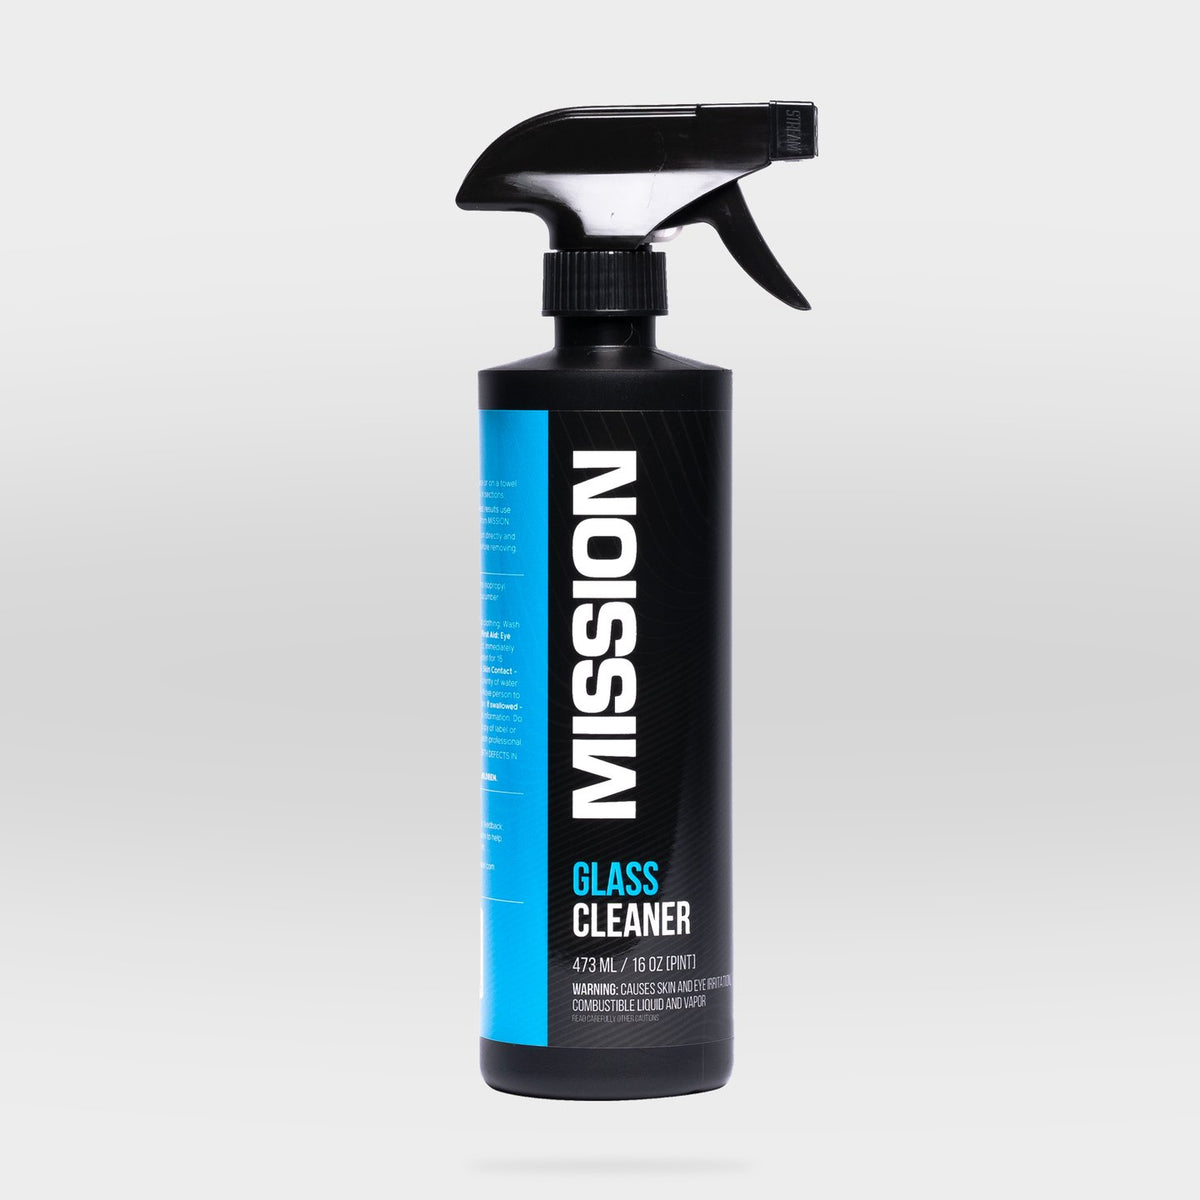 Mission Glass Cleaner